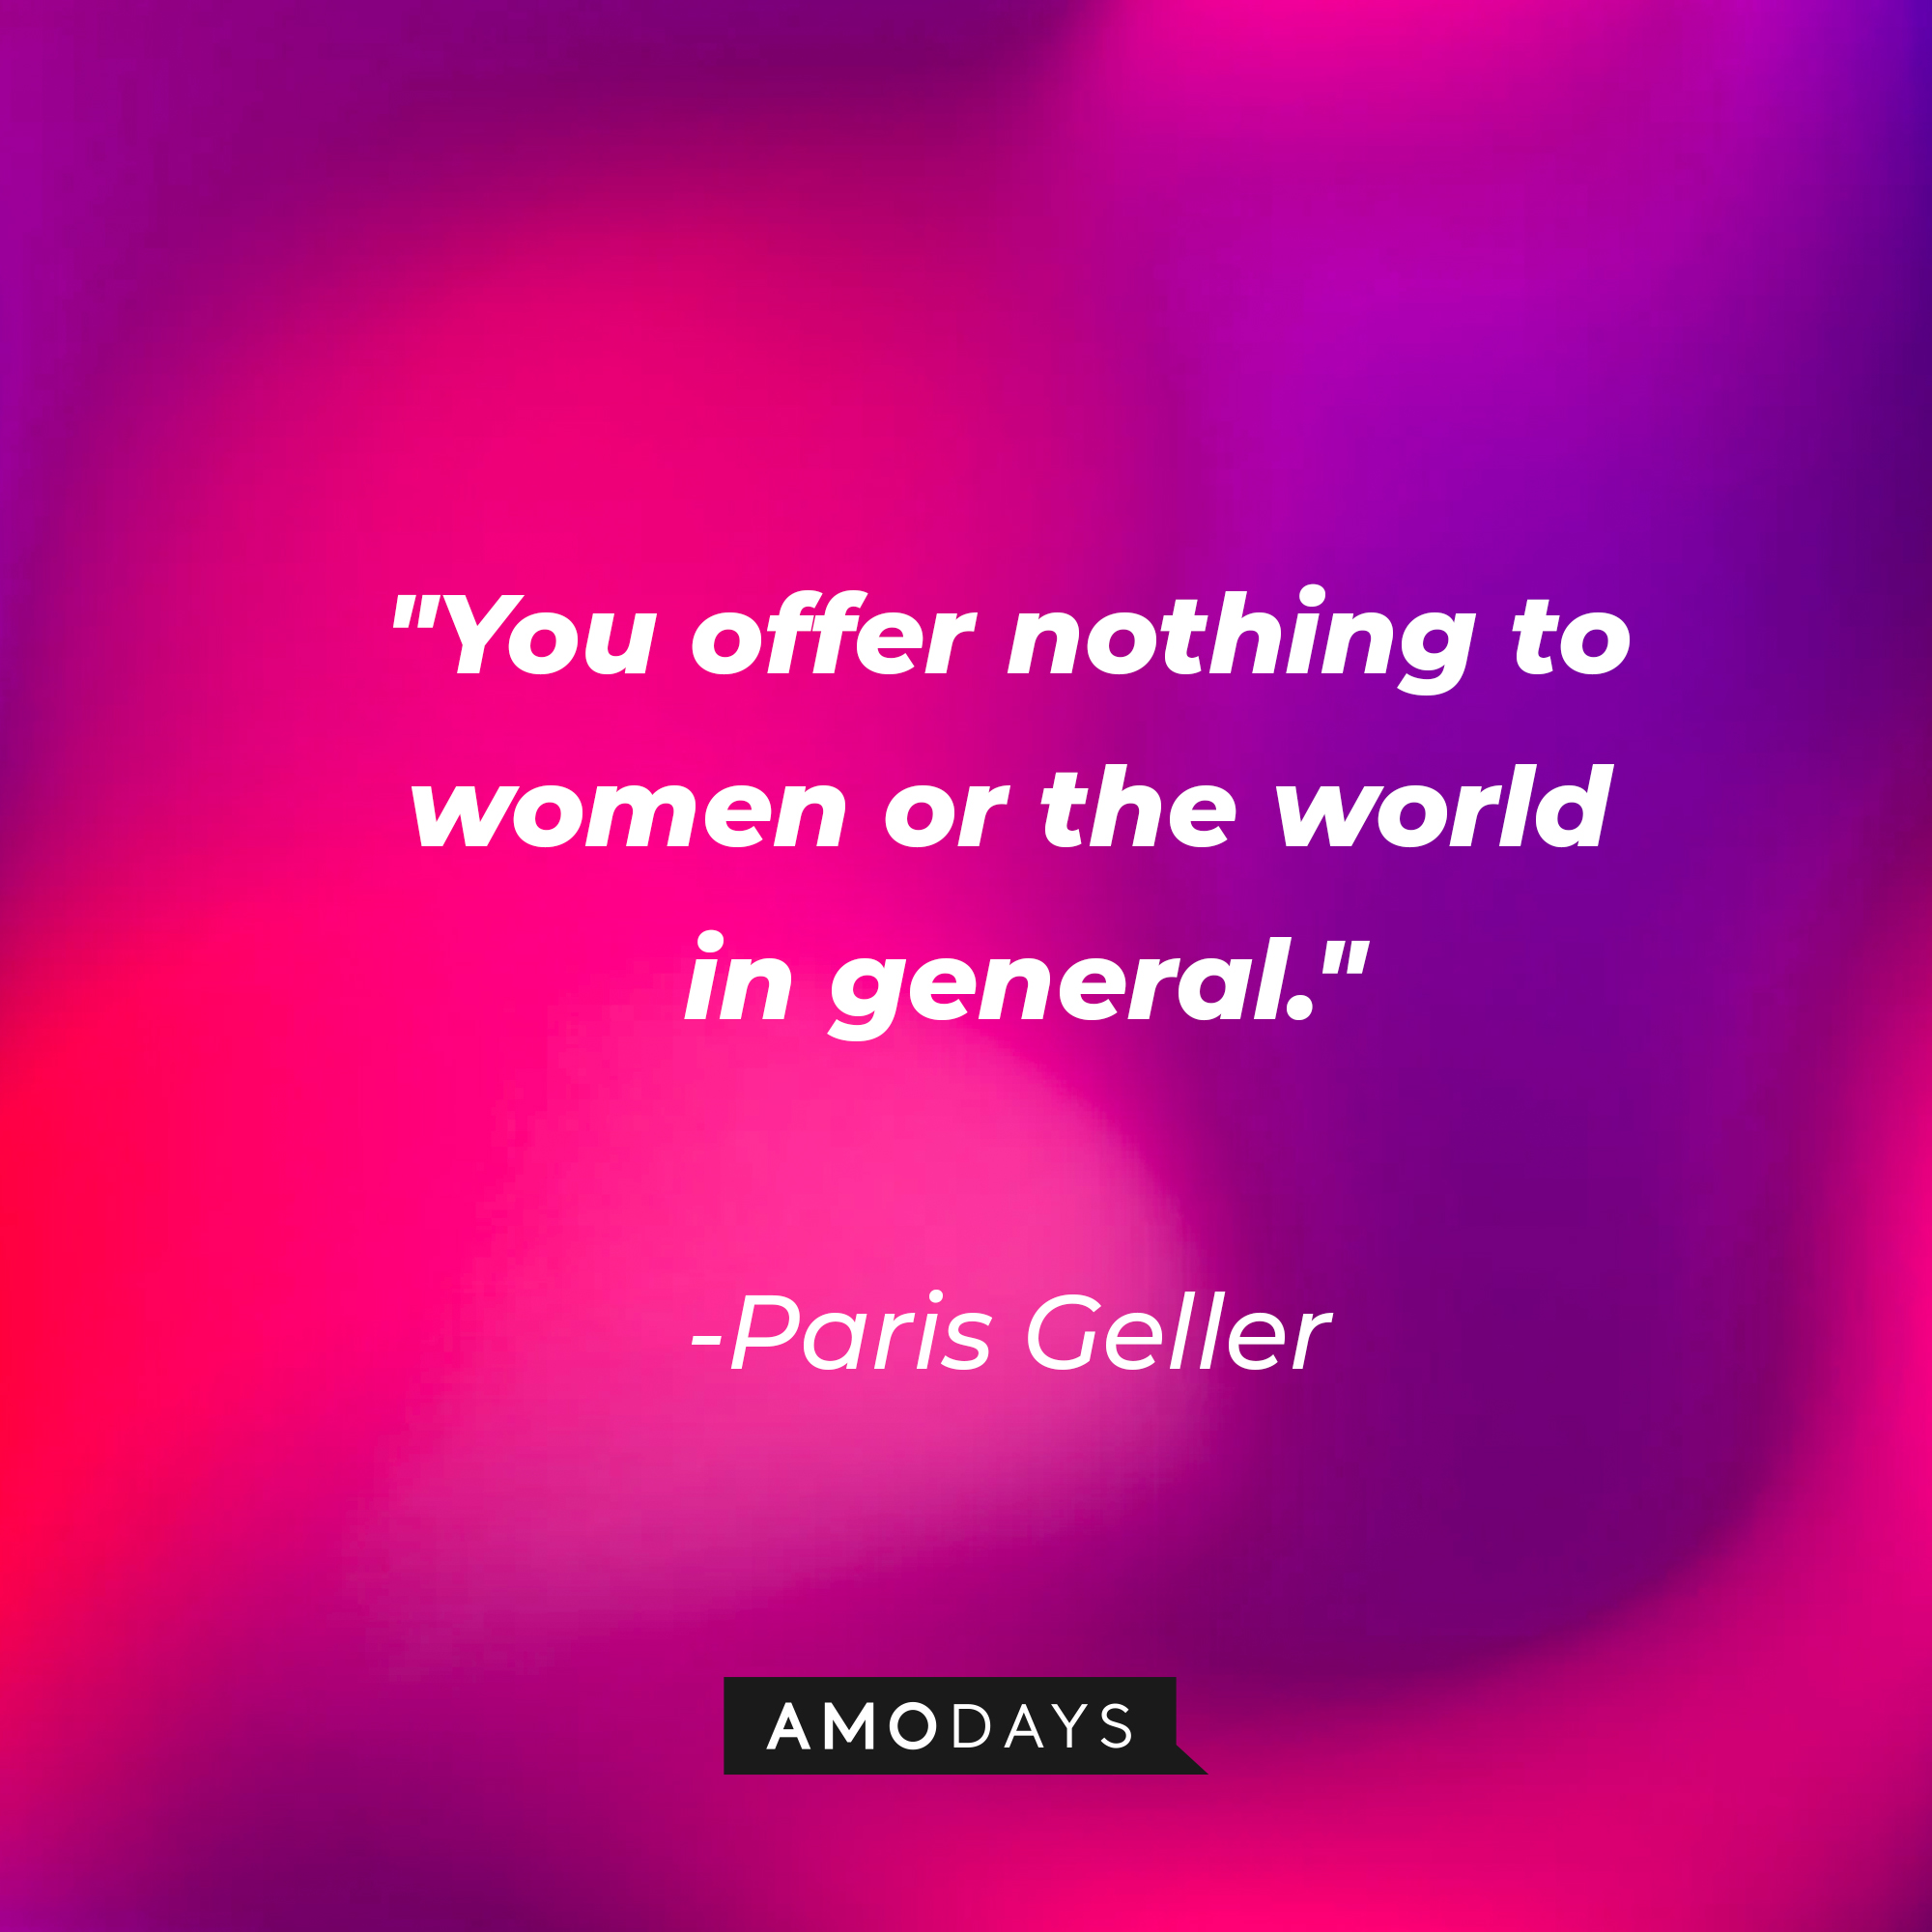 Paris Geller’s quote: “You offer nothing to women or the world in general.” | Source: AmoDays